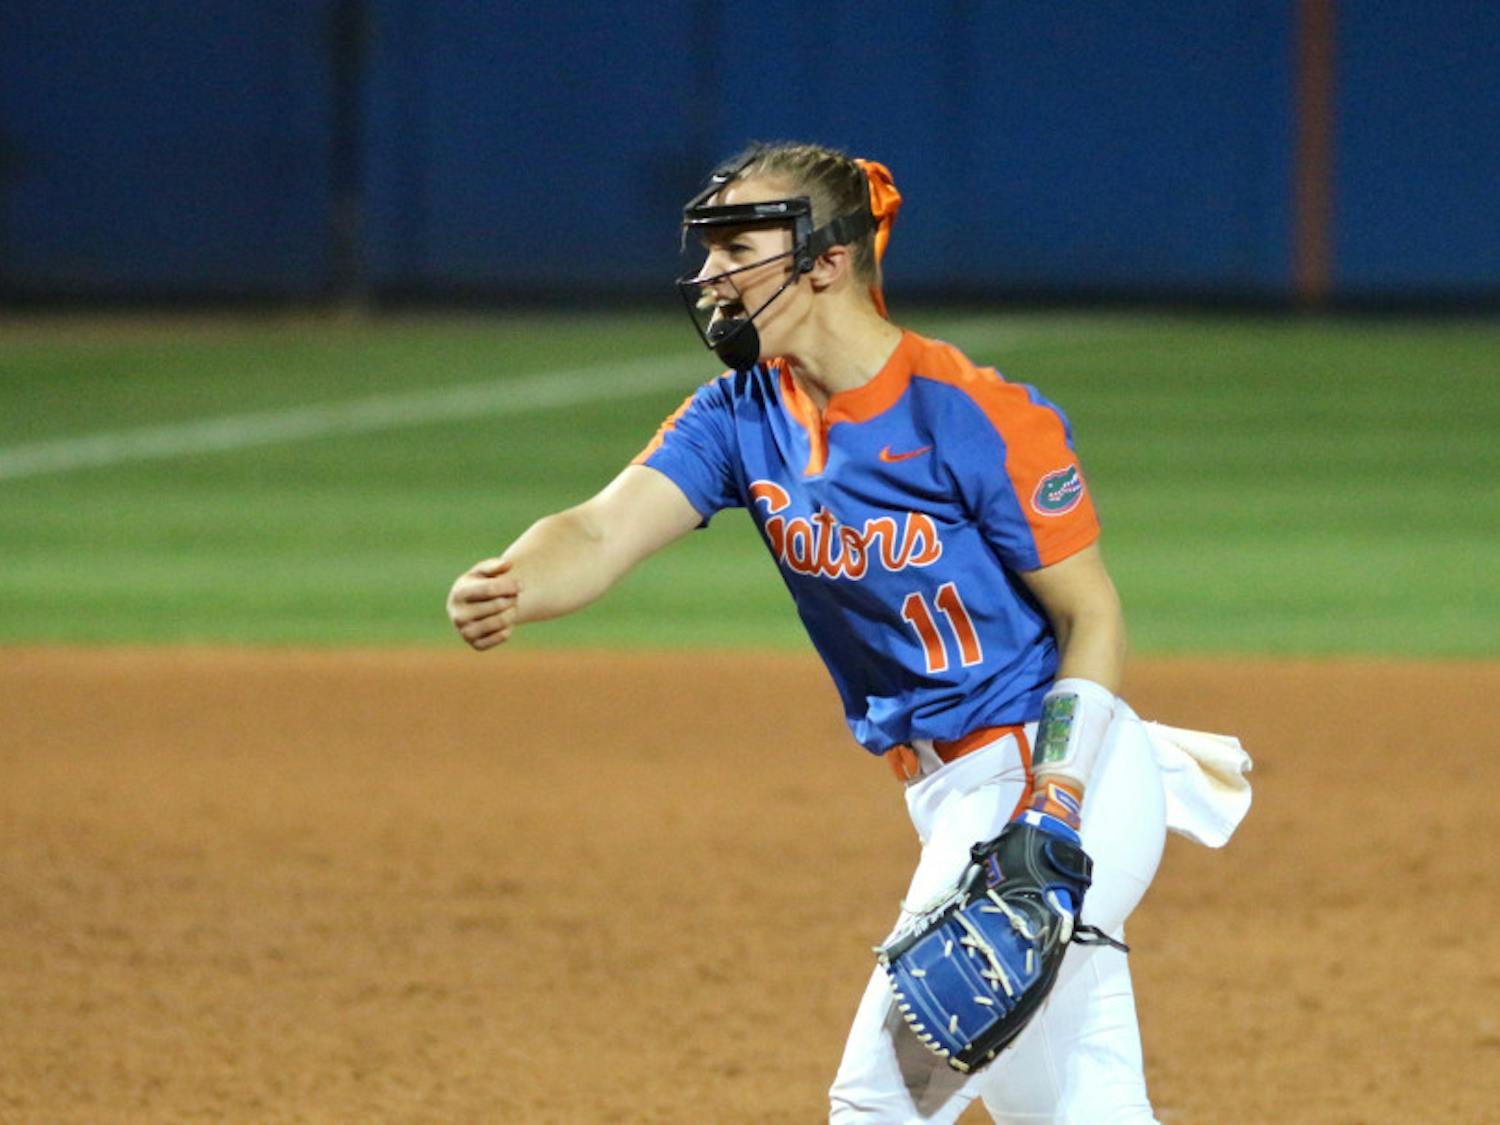 Junior Kelly Barnhill needed just 71 pitches to toss her fifth no-hitter this season. 